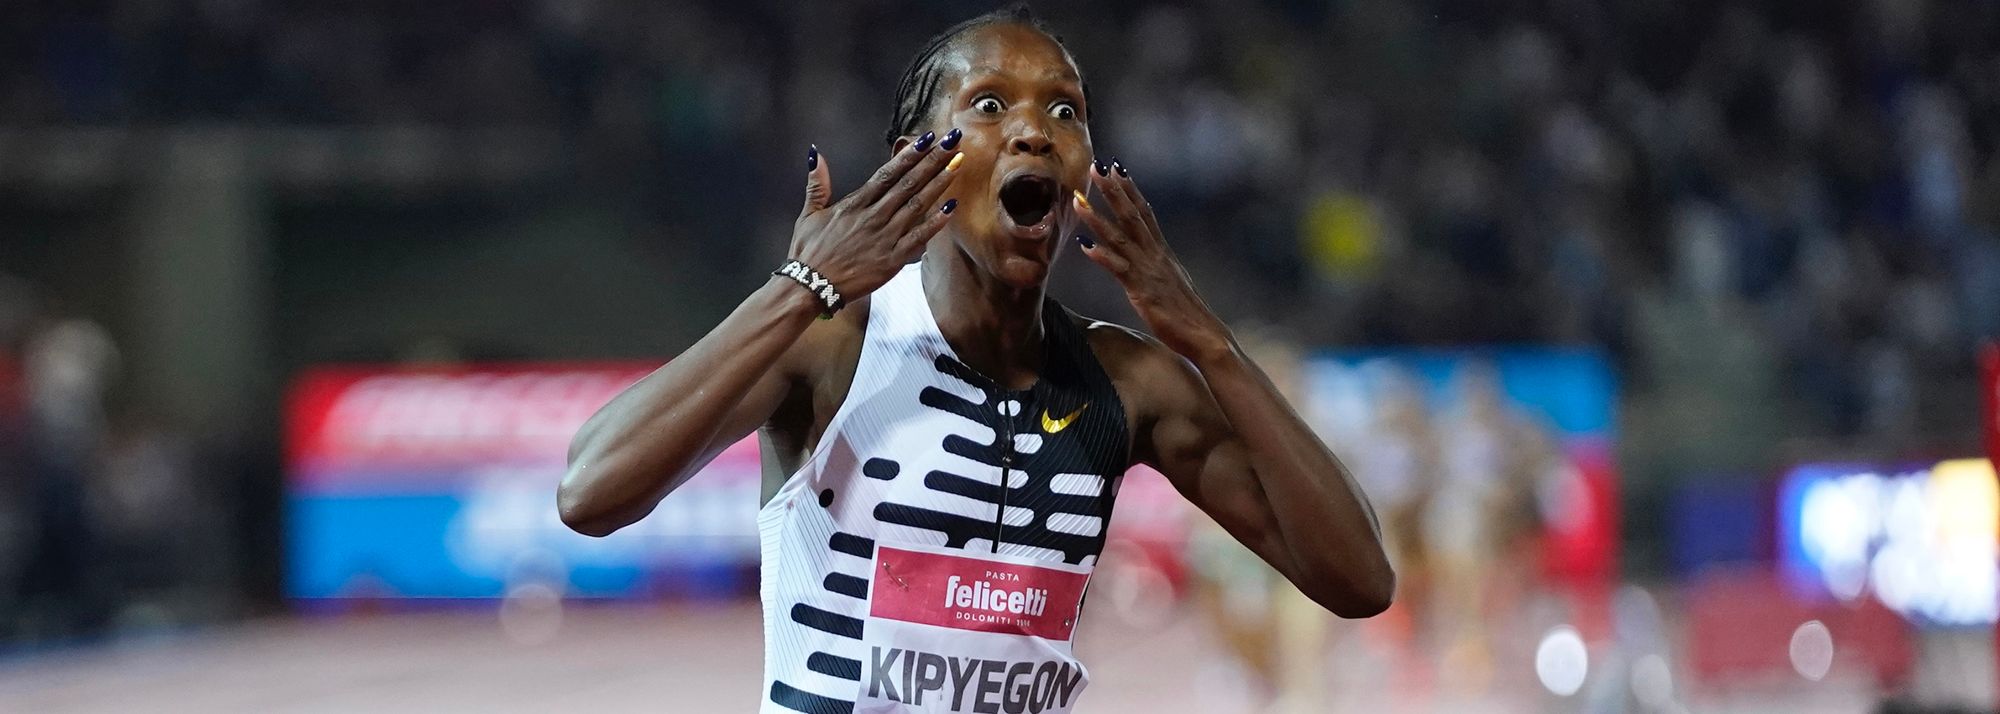 Coming into the Golden Gala meeting in Florence, Faith Kipyegon said the world 1500m record was in her heart and on her mind. By the end of tonight’s race, it was also in her legs and on the clock – which she stopped in an astonishing 3:49.11